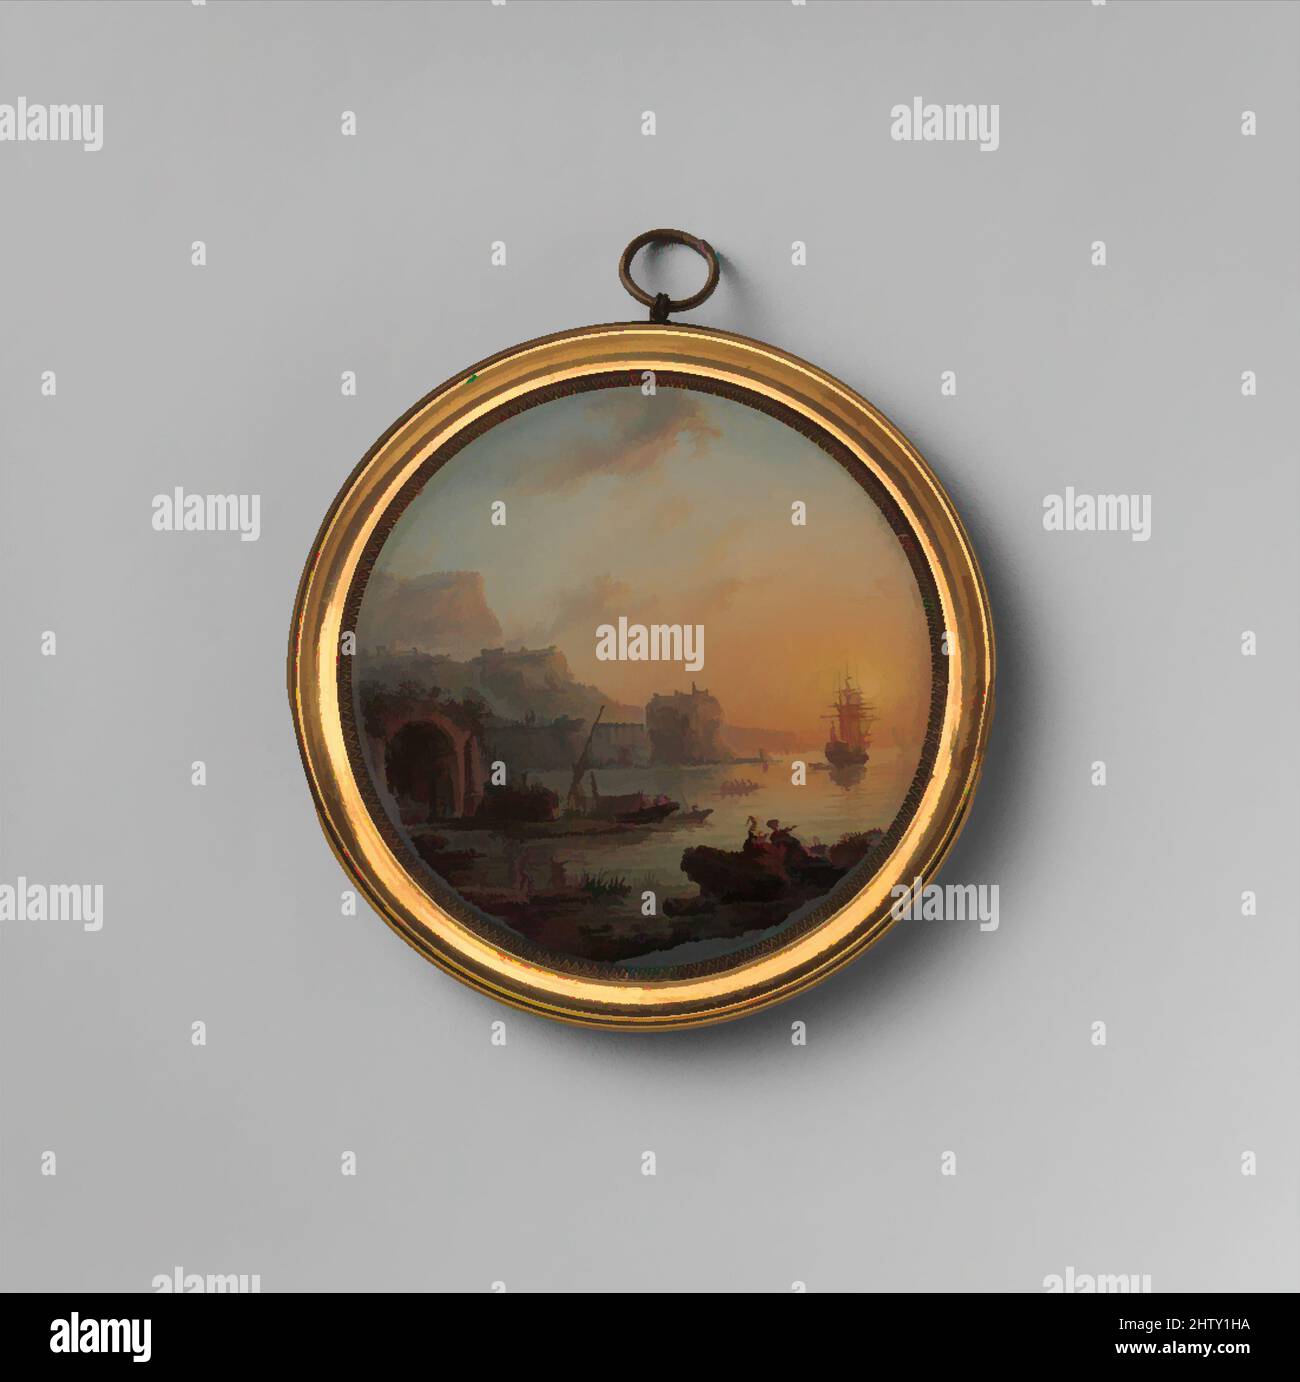 Art inspired by View of a Harbor, Verre fixé, Diameter 3 1/8 in. (80 mm), Miniatures, French Painter (ca. 1750, Classic works modernized by Artotop with a splash of modernity. Shapes, color and value, eye-catching visual impact on art. Emotions through freedom of artworks in a contemporary way. A timeless message pursuing a wildly creative new direction. Artists turning to the digital medium and creating the Artotop NFT Stock Photo